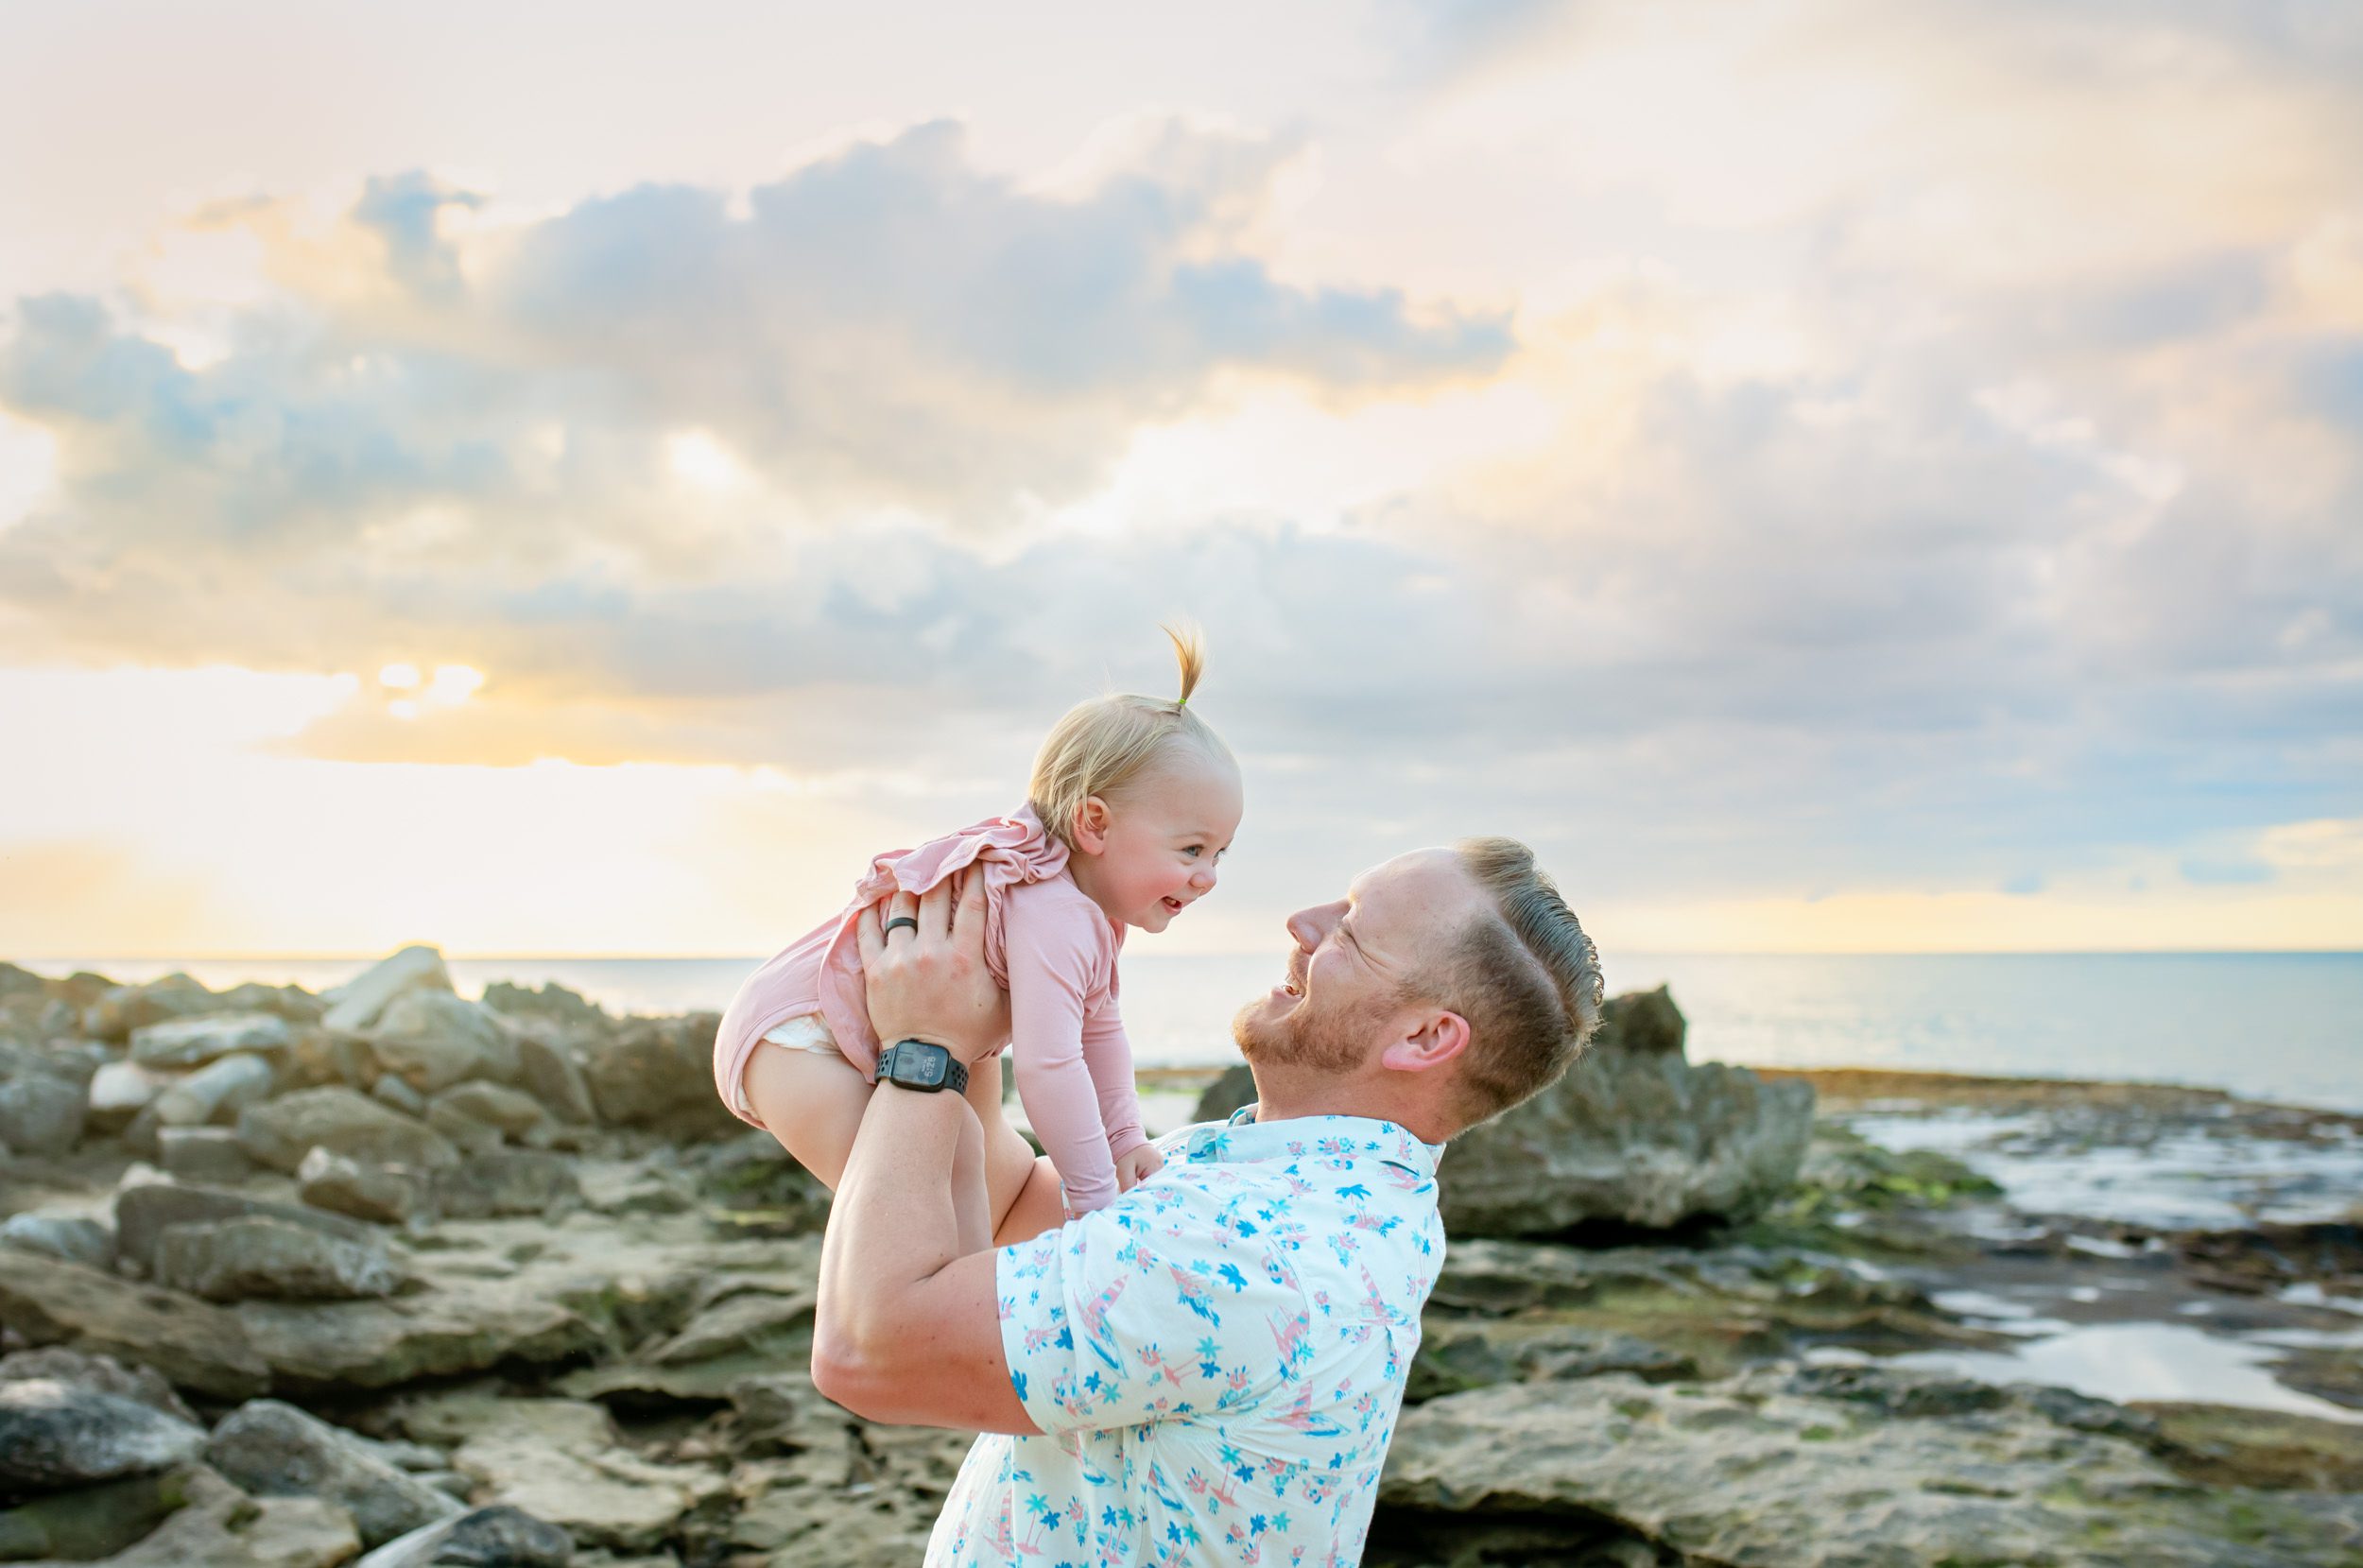 Dad and baby playing at the beach at sunset